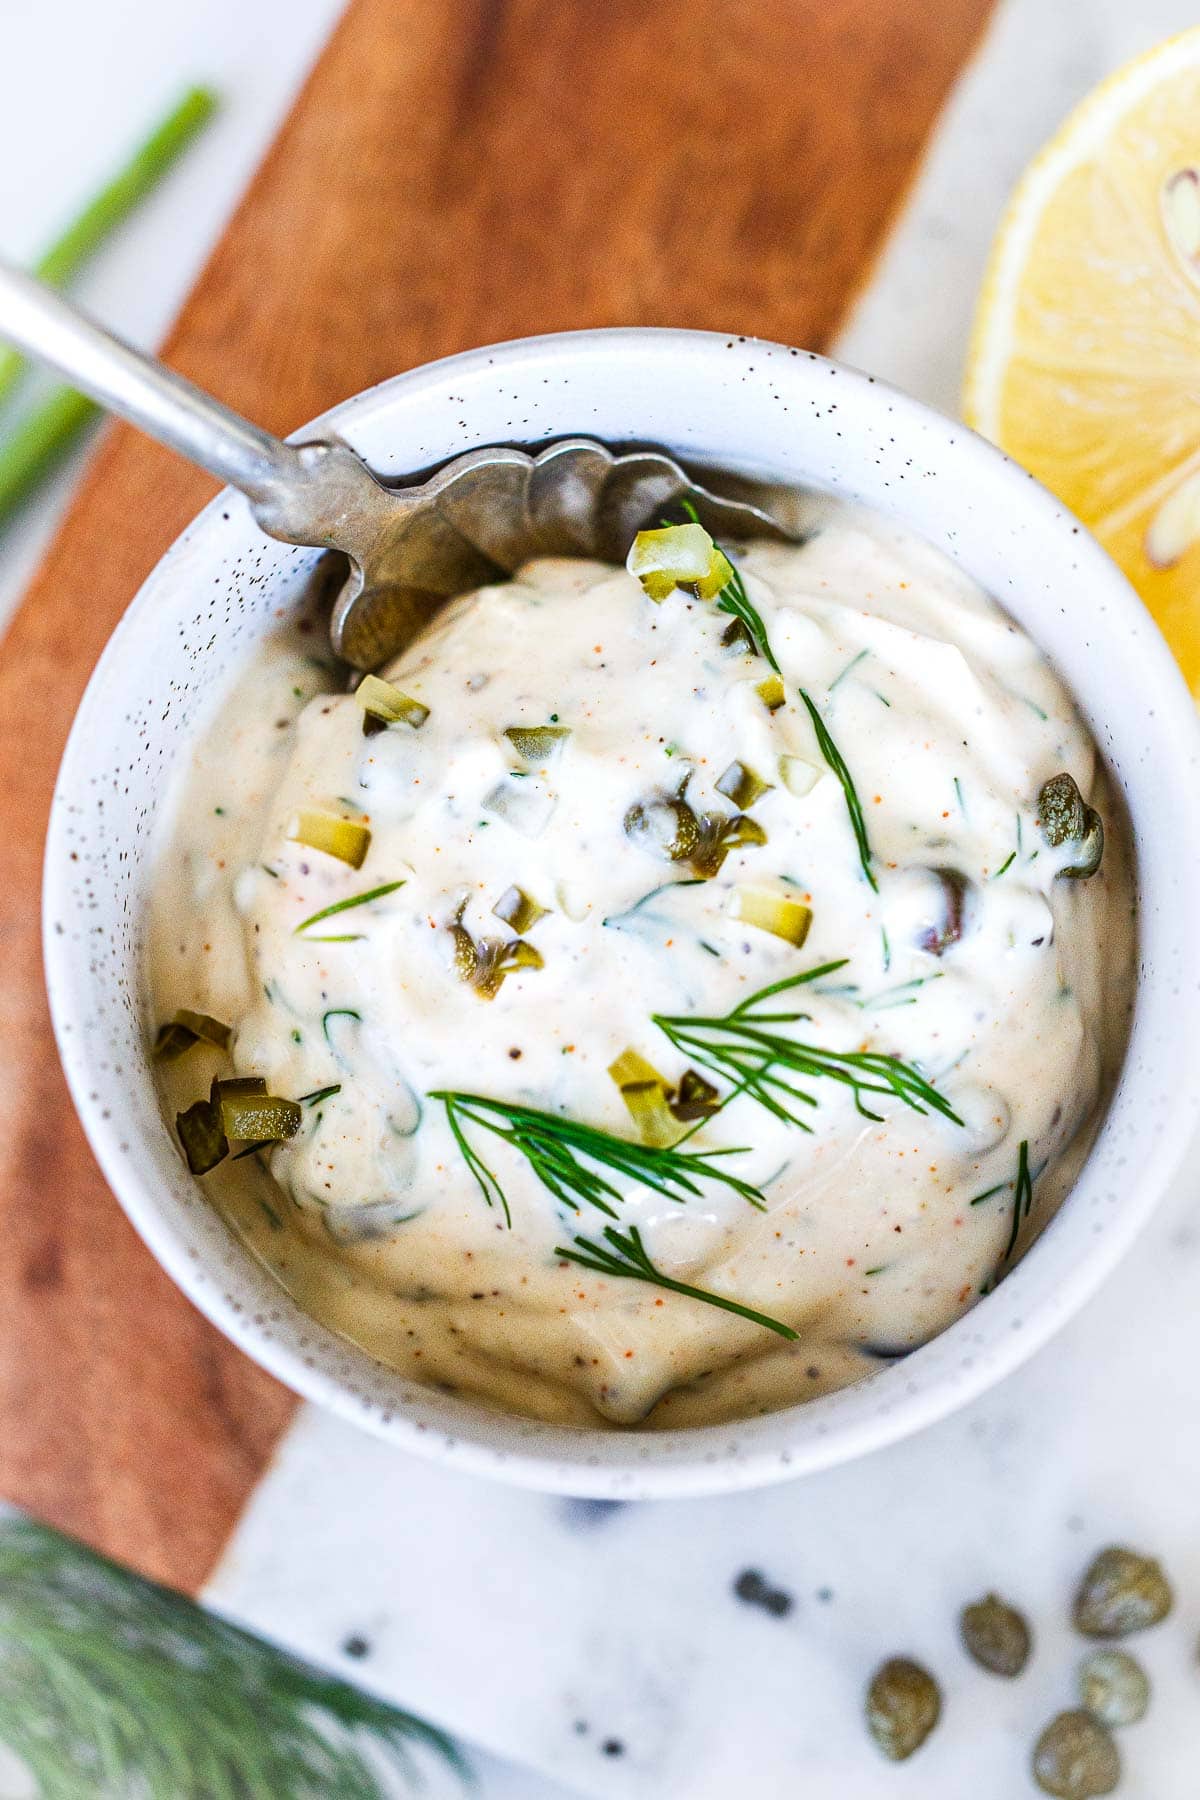 homemade tartar sauces with capers and dill. 